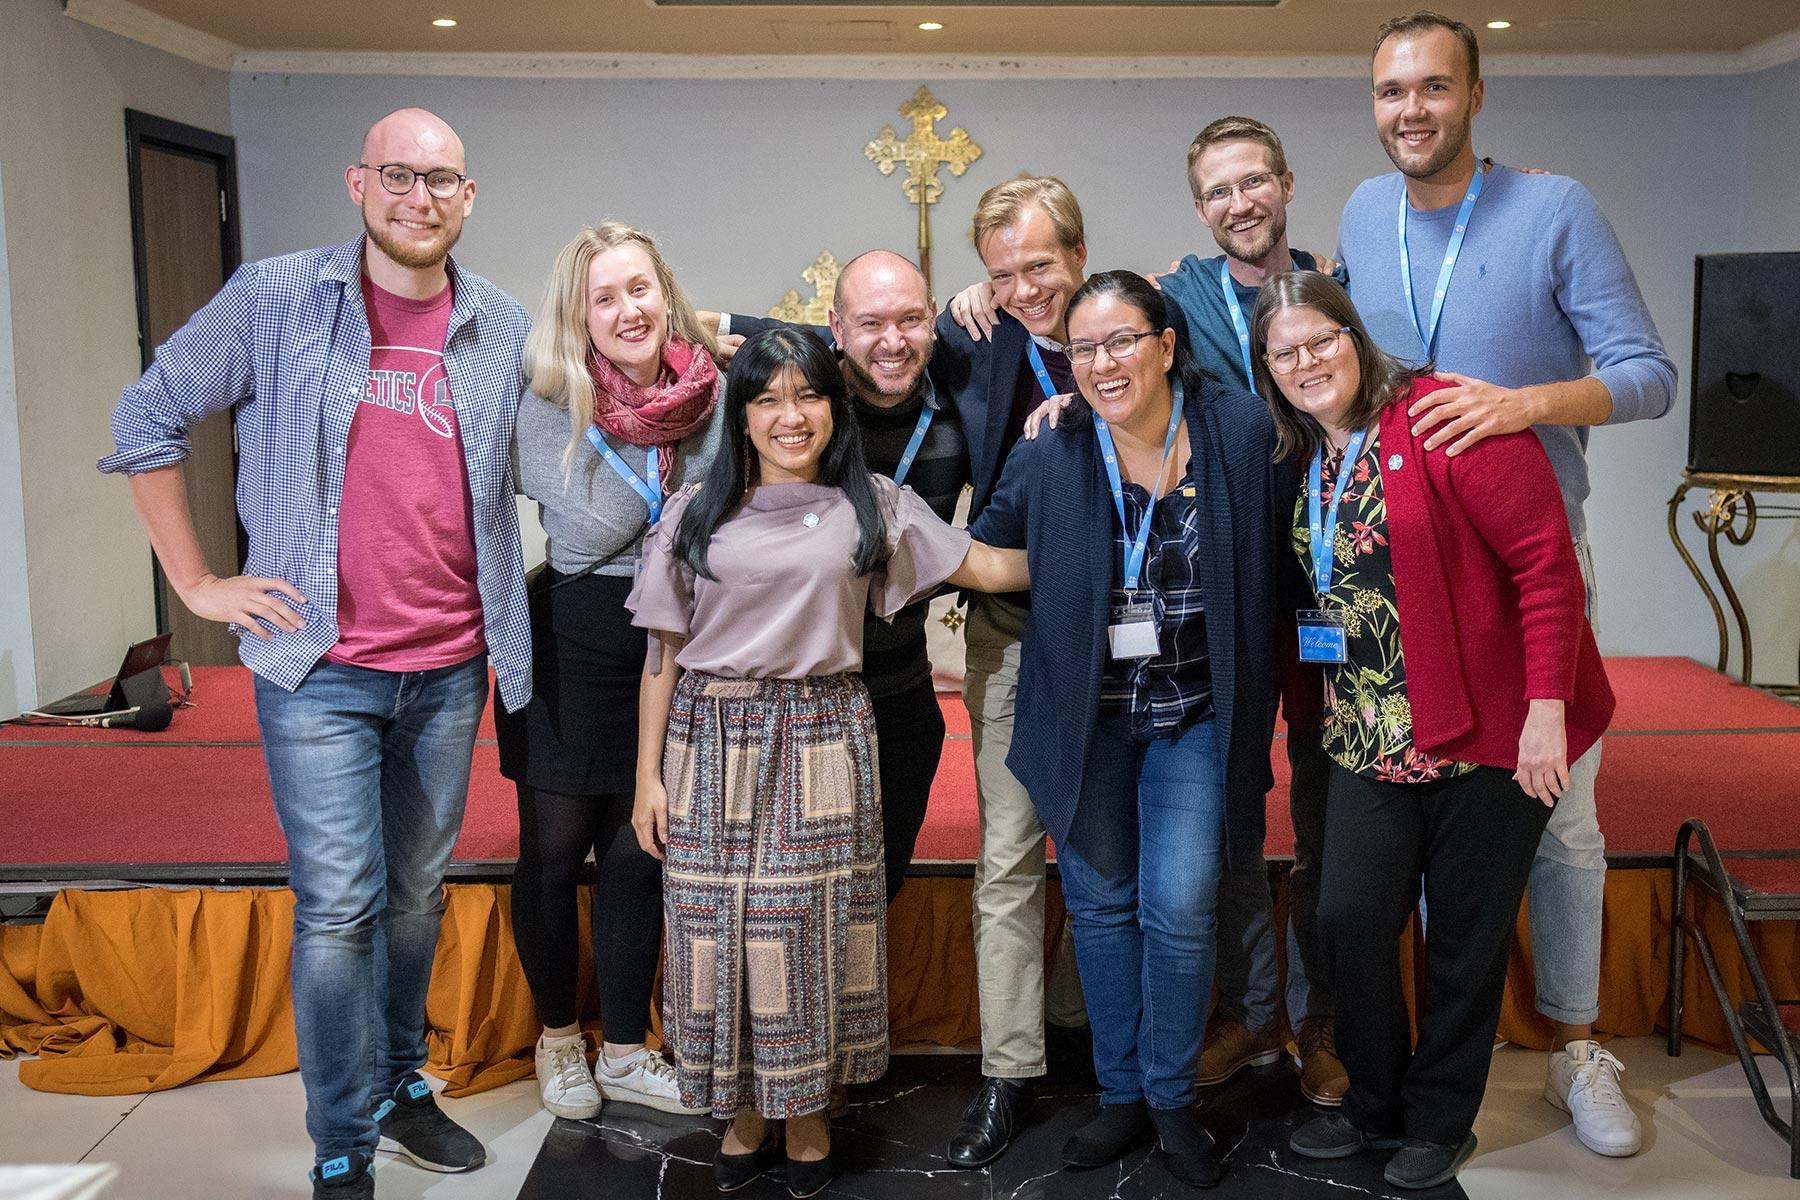 Young Lutherans gathered at the global consultation in Addis Ababa, Ethiopia, in October 2019 on the theme of 'We believe in the Holy Spirit: Global Perspectives on Lutheran Identities'. Photo: LWF/Albin Hillert